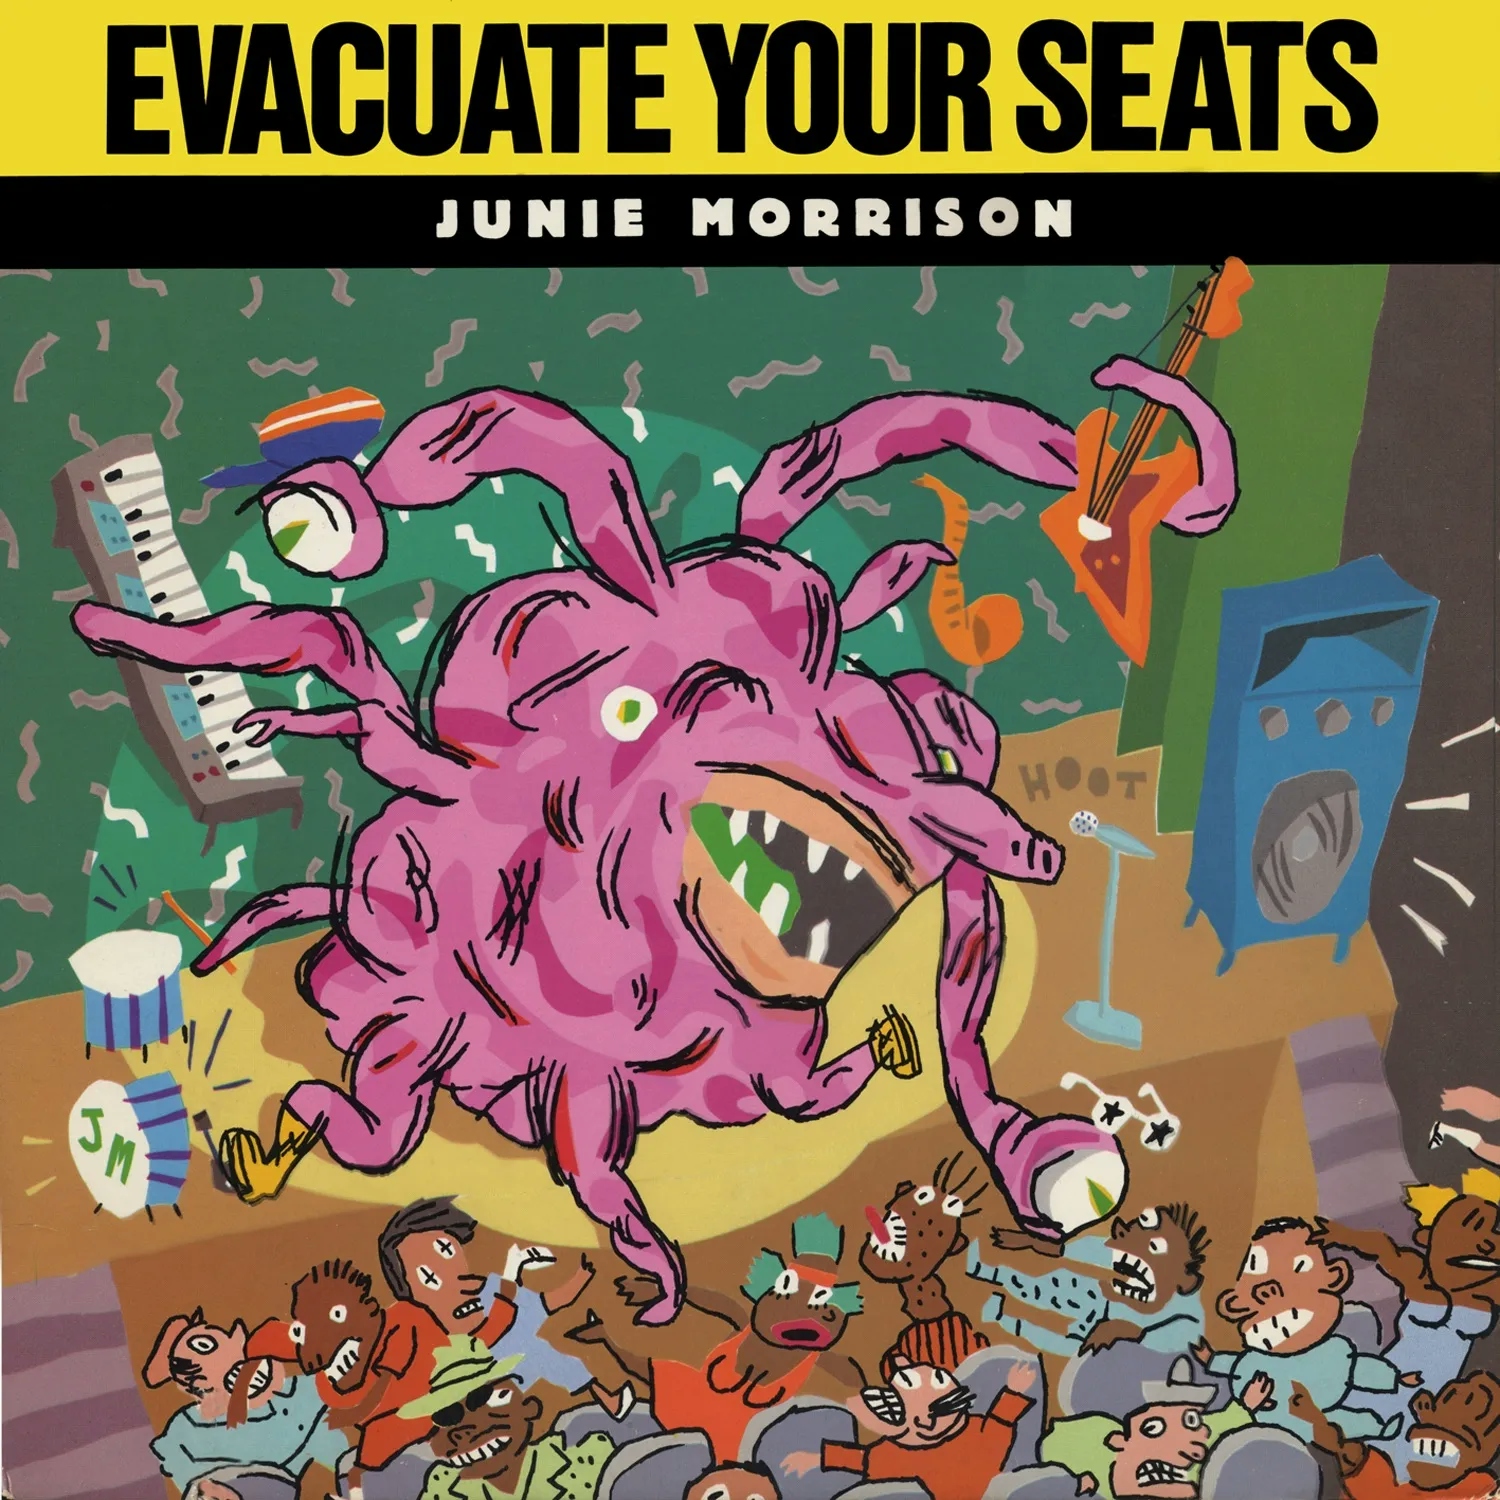 Album artwork for Album artwork for Evacuate Your Seats - Expanded Edition by Junie Morrison by Evacuate Your Seats - Expanded Edition - Junie Morrison